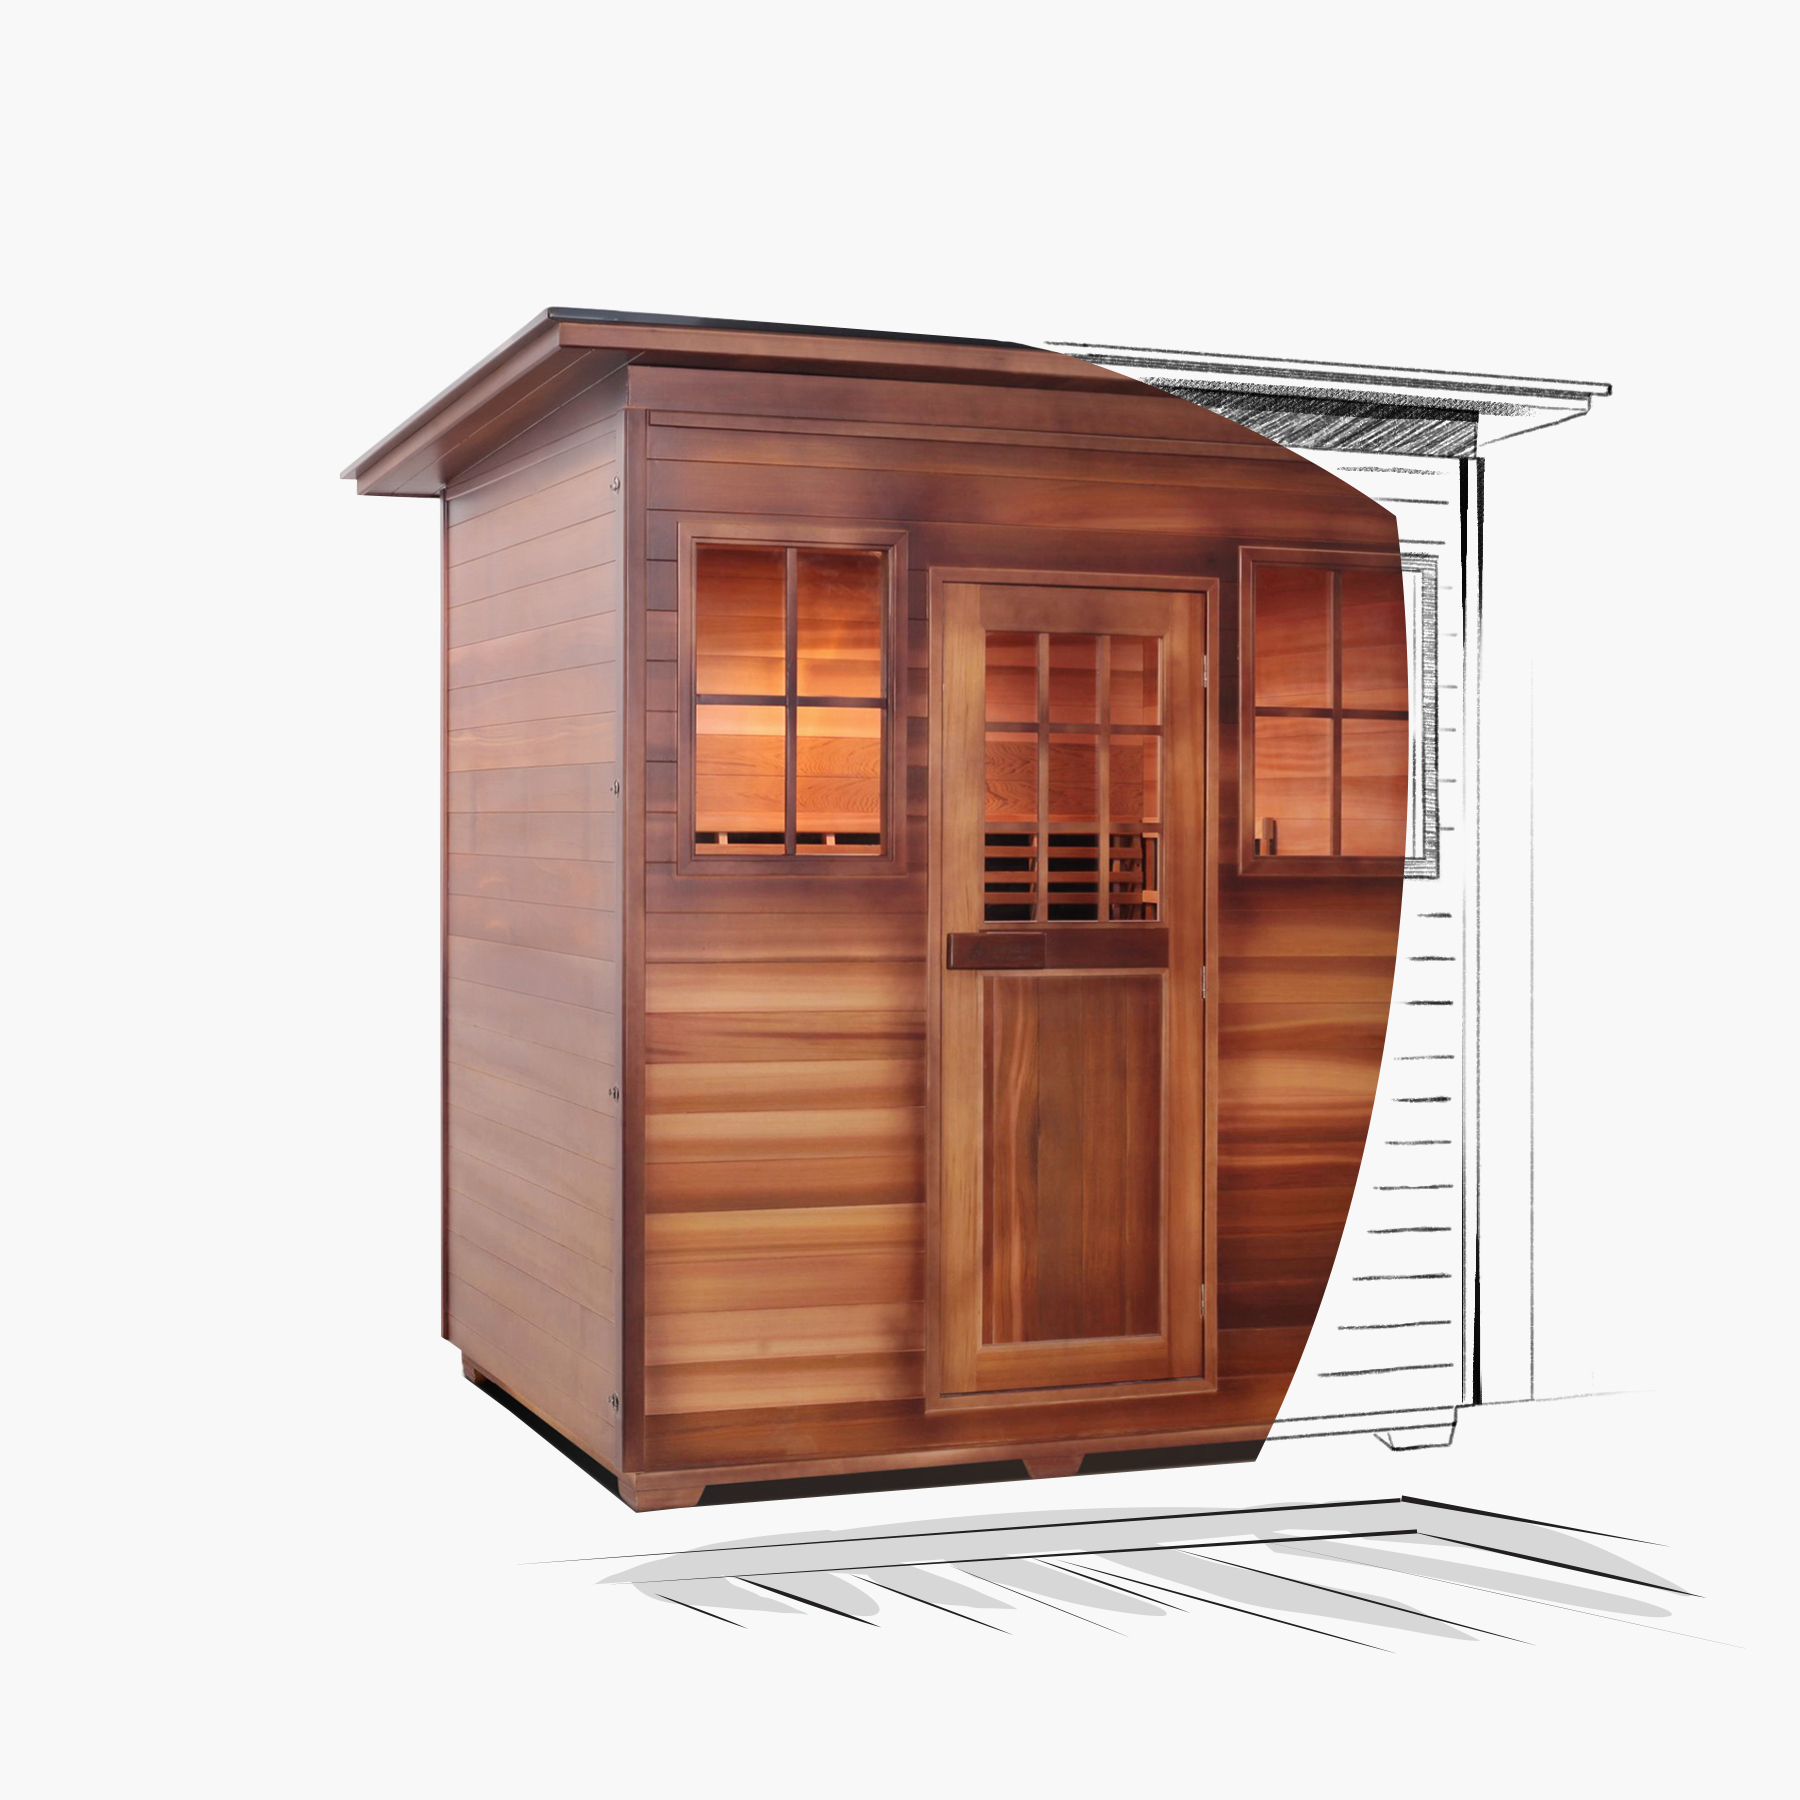 What is usually called an Infrared sauna is, in fact, an infrared therapy cabin. Why is it called a sauna? It’s because the sauna environment actually helps to deliver infrared to your body and lack of clothes makes the effectiveness of the therapy session much higher.